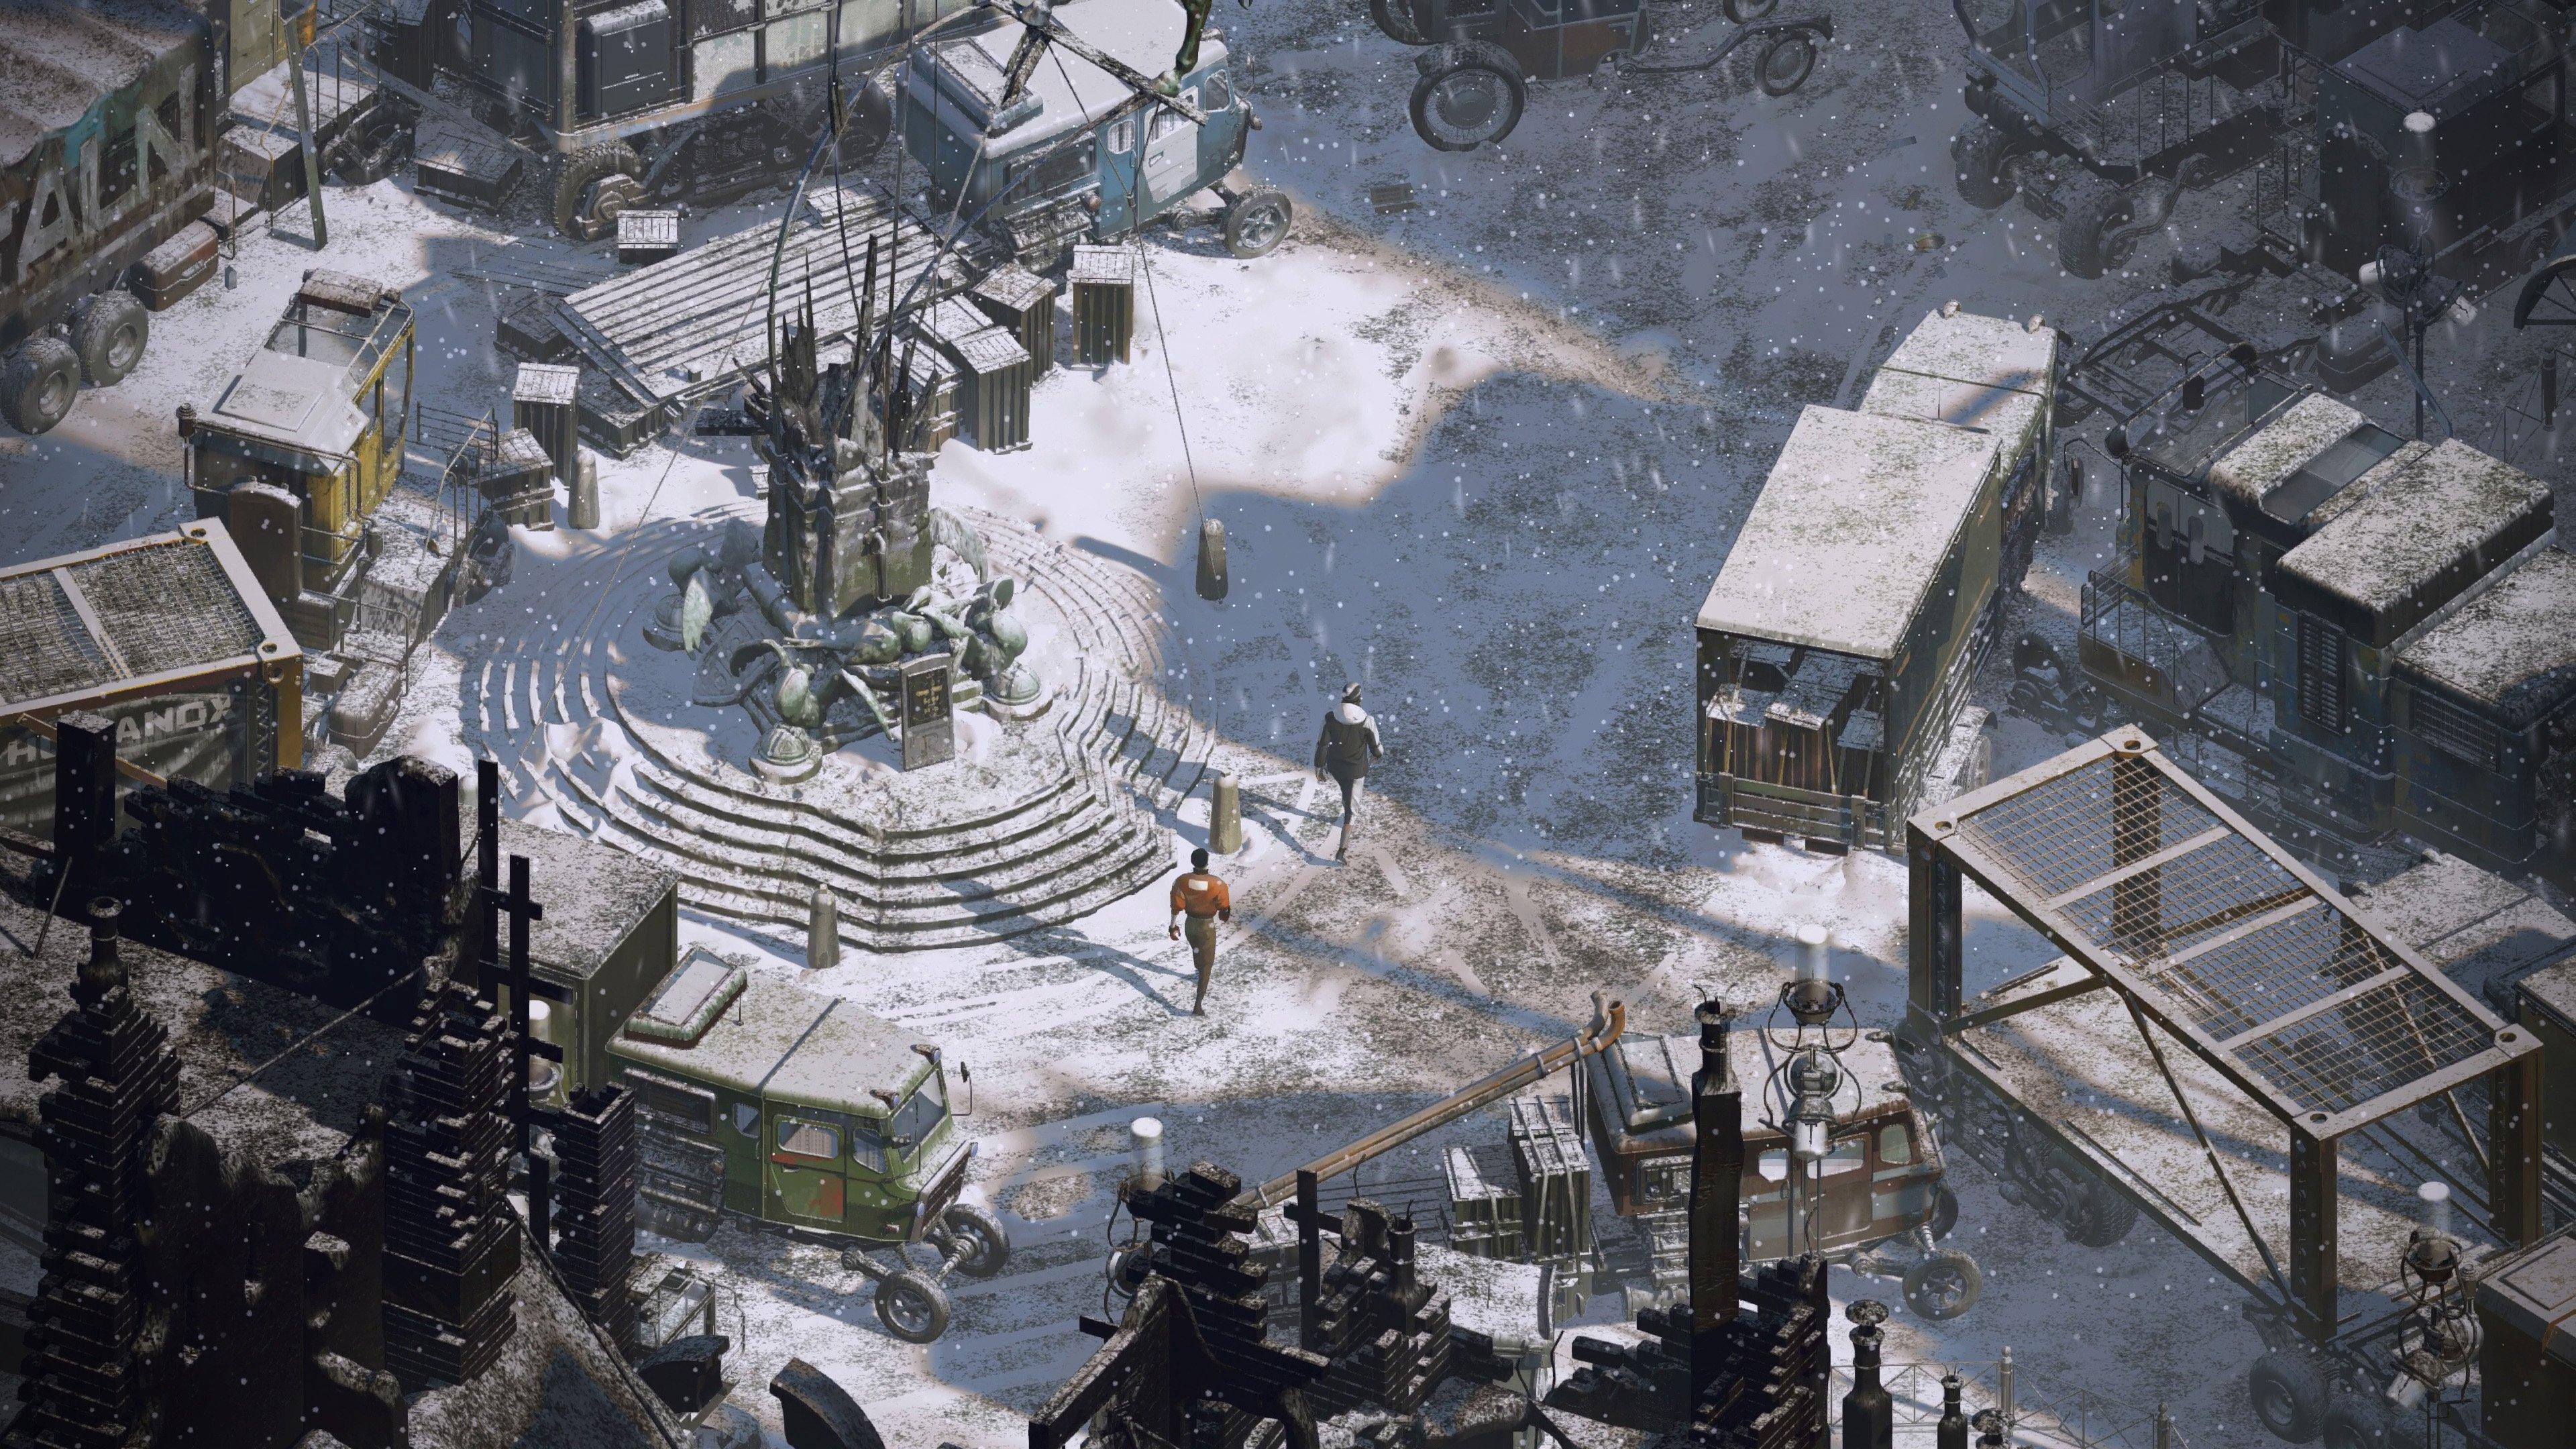 Disco Elysium: The Final Cut for PlayStation 4